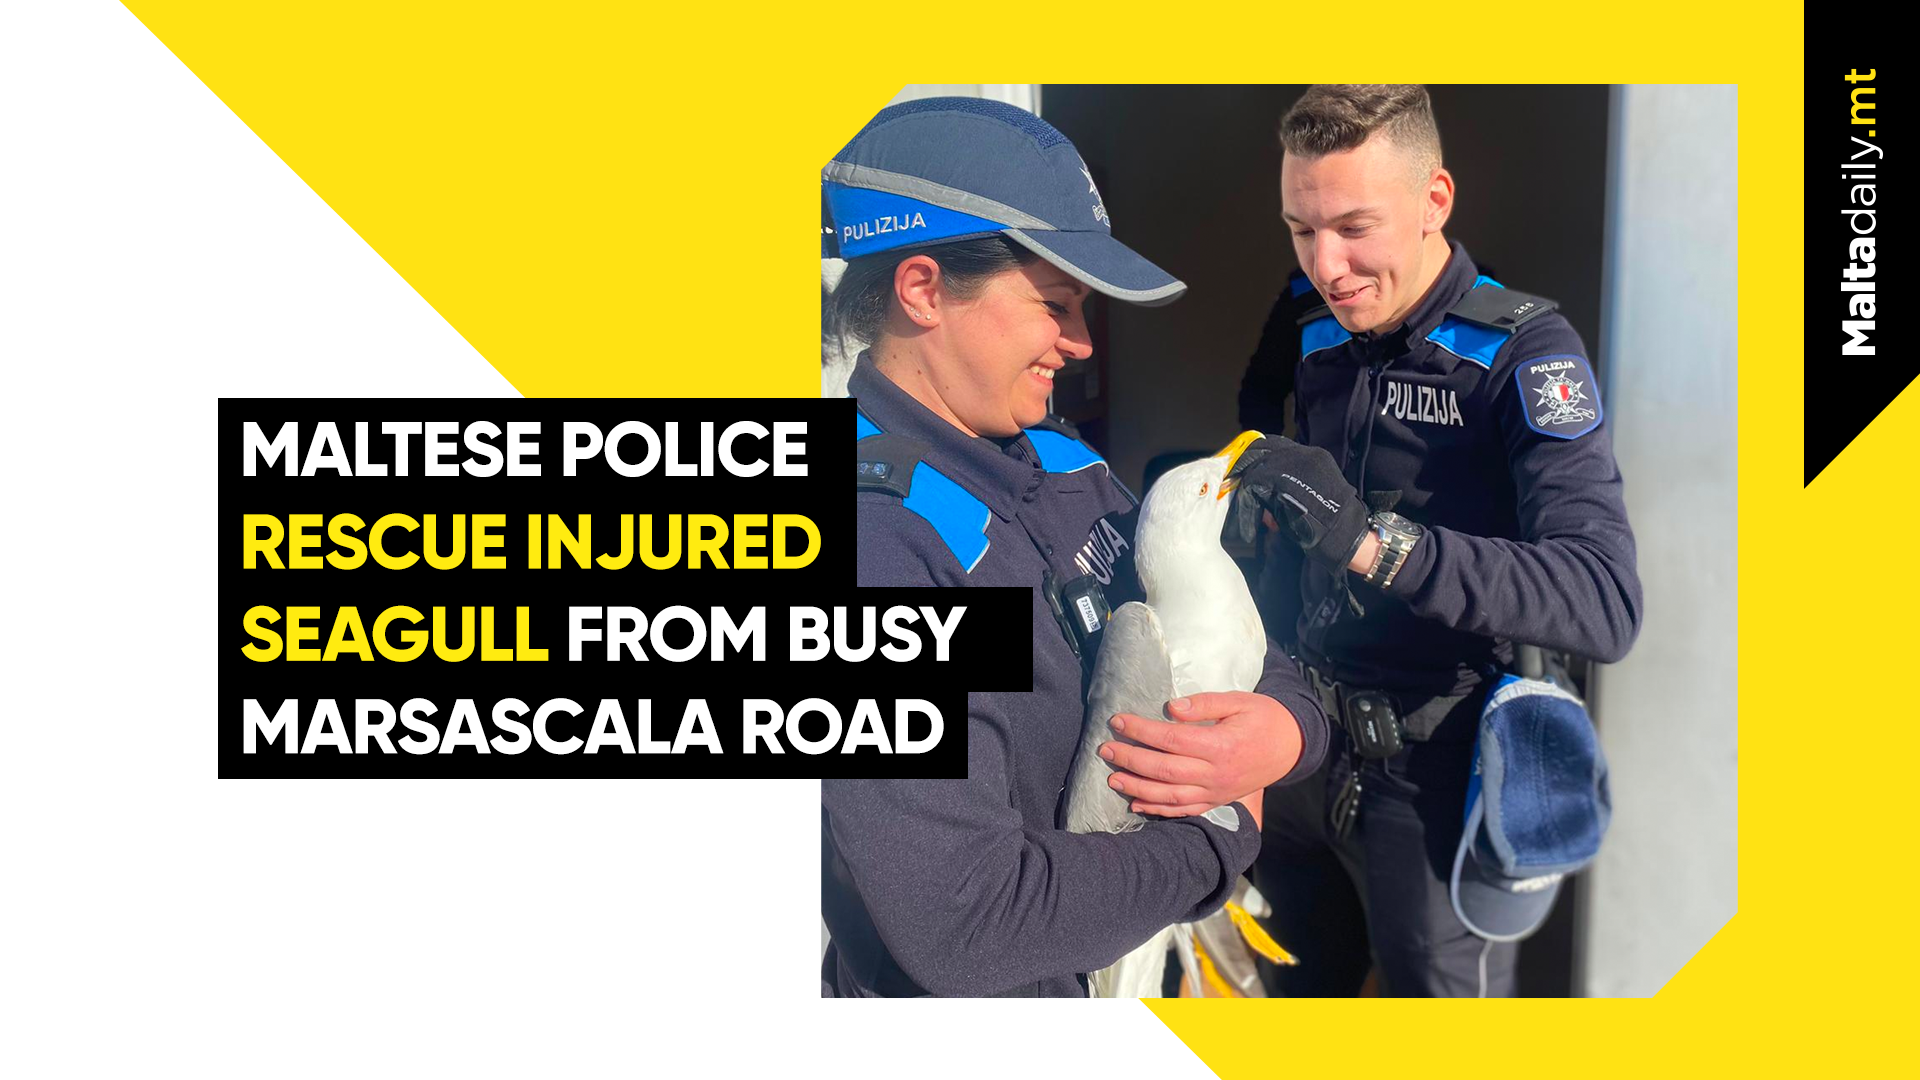 Maltese police rescue injured seagull from busy Marsascala road